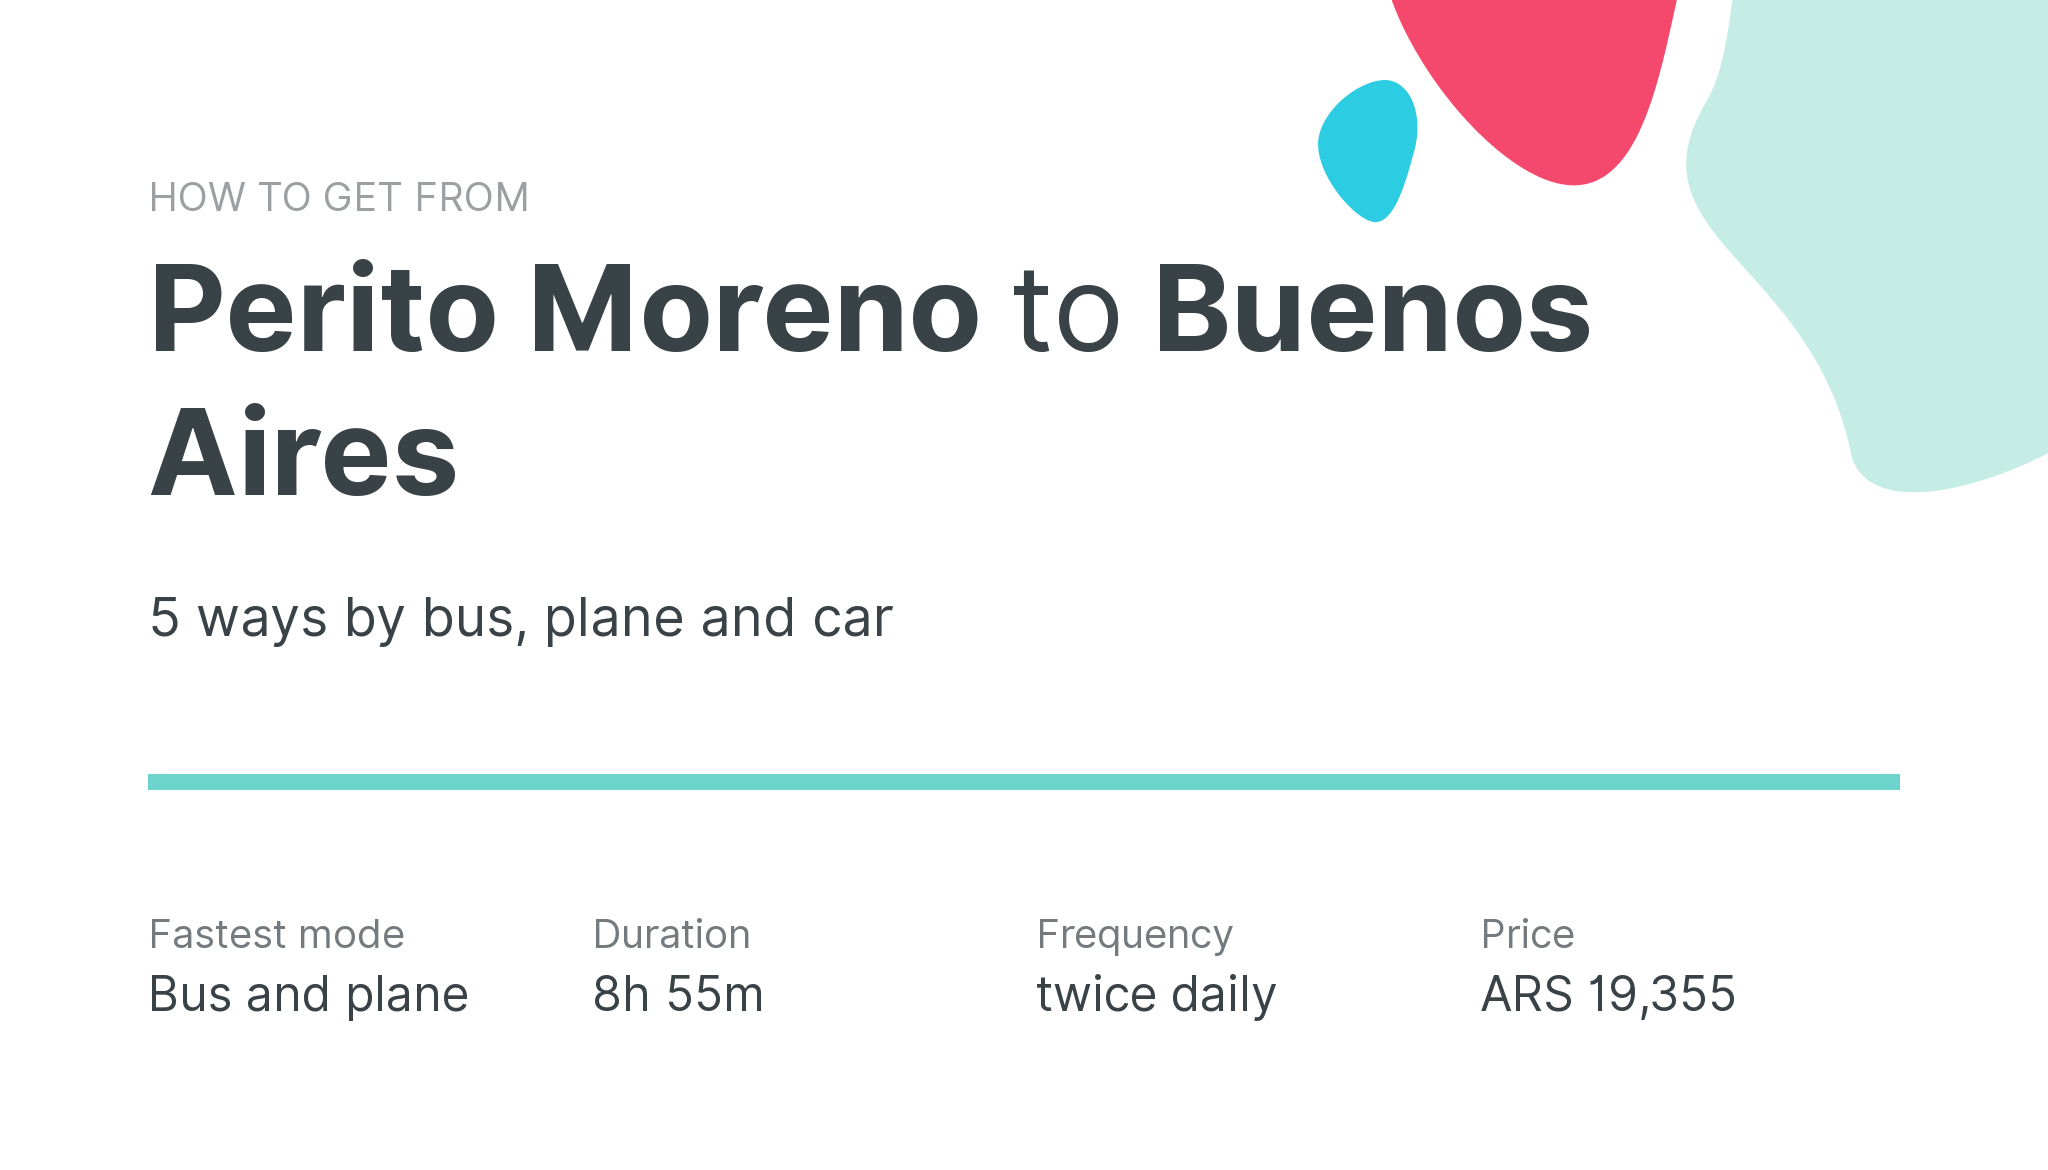 How do I get from Perito Moreno to Buenos Aires